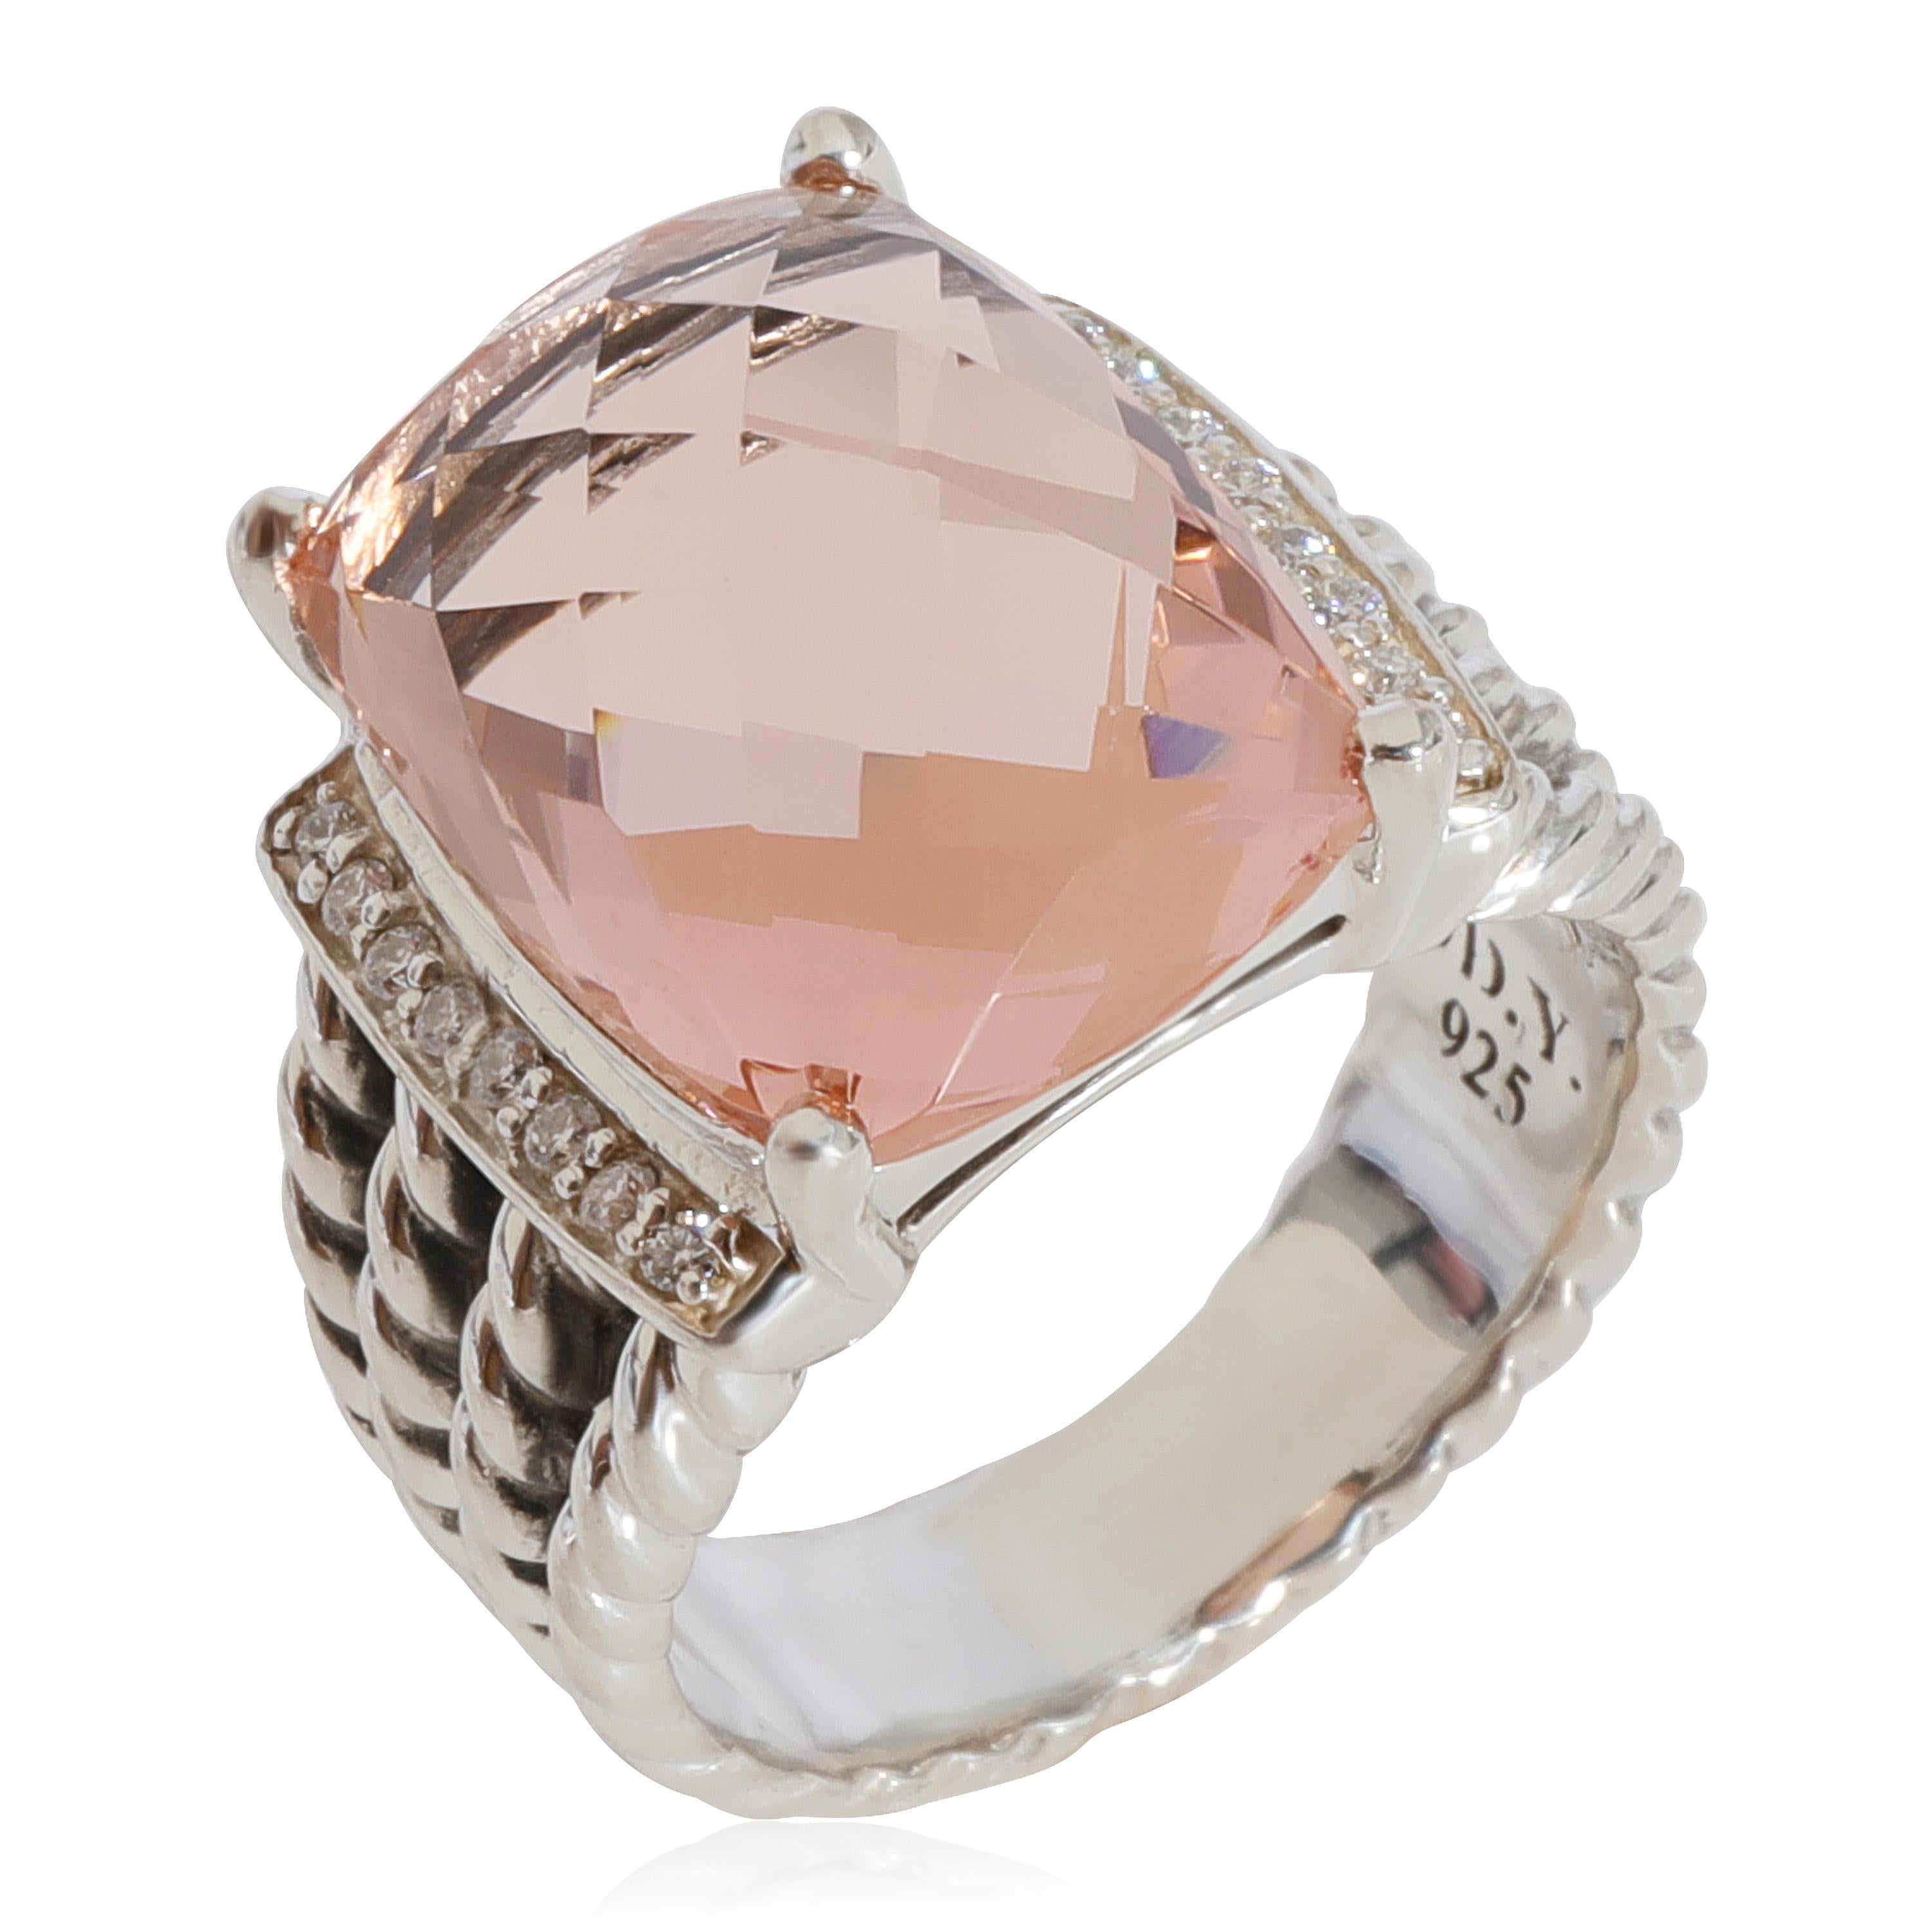 David Yurman Wheaton Morganite Diamond  Ring in Sterling Silver 0.13

PRIMARY DETAILS
SKU: 123594
Listing Title: David Yurman Wheaton Morganite Diamond  Ring in Sterling Silver 0.13
Condition Description: Retails for 2700 USD. In excellent condition